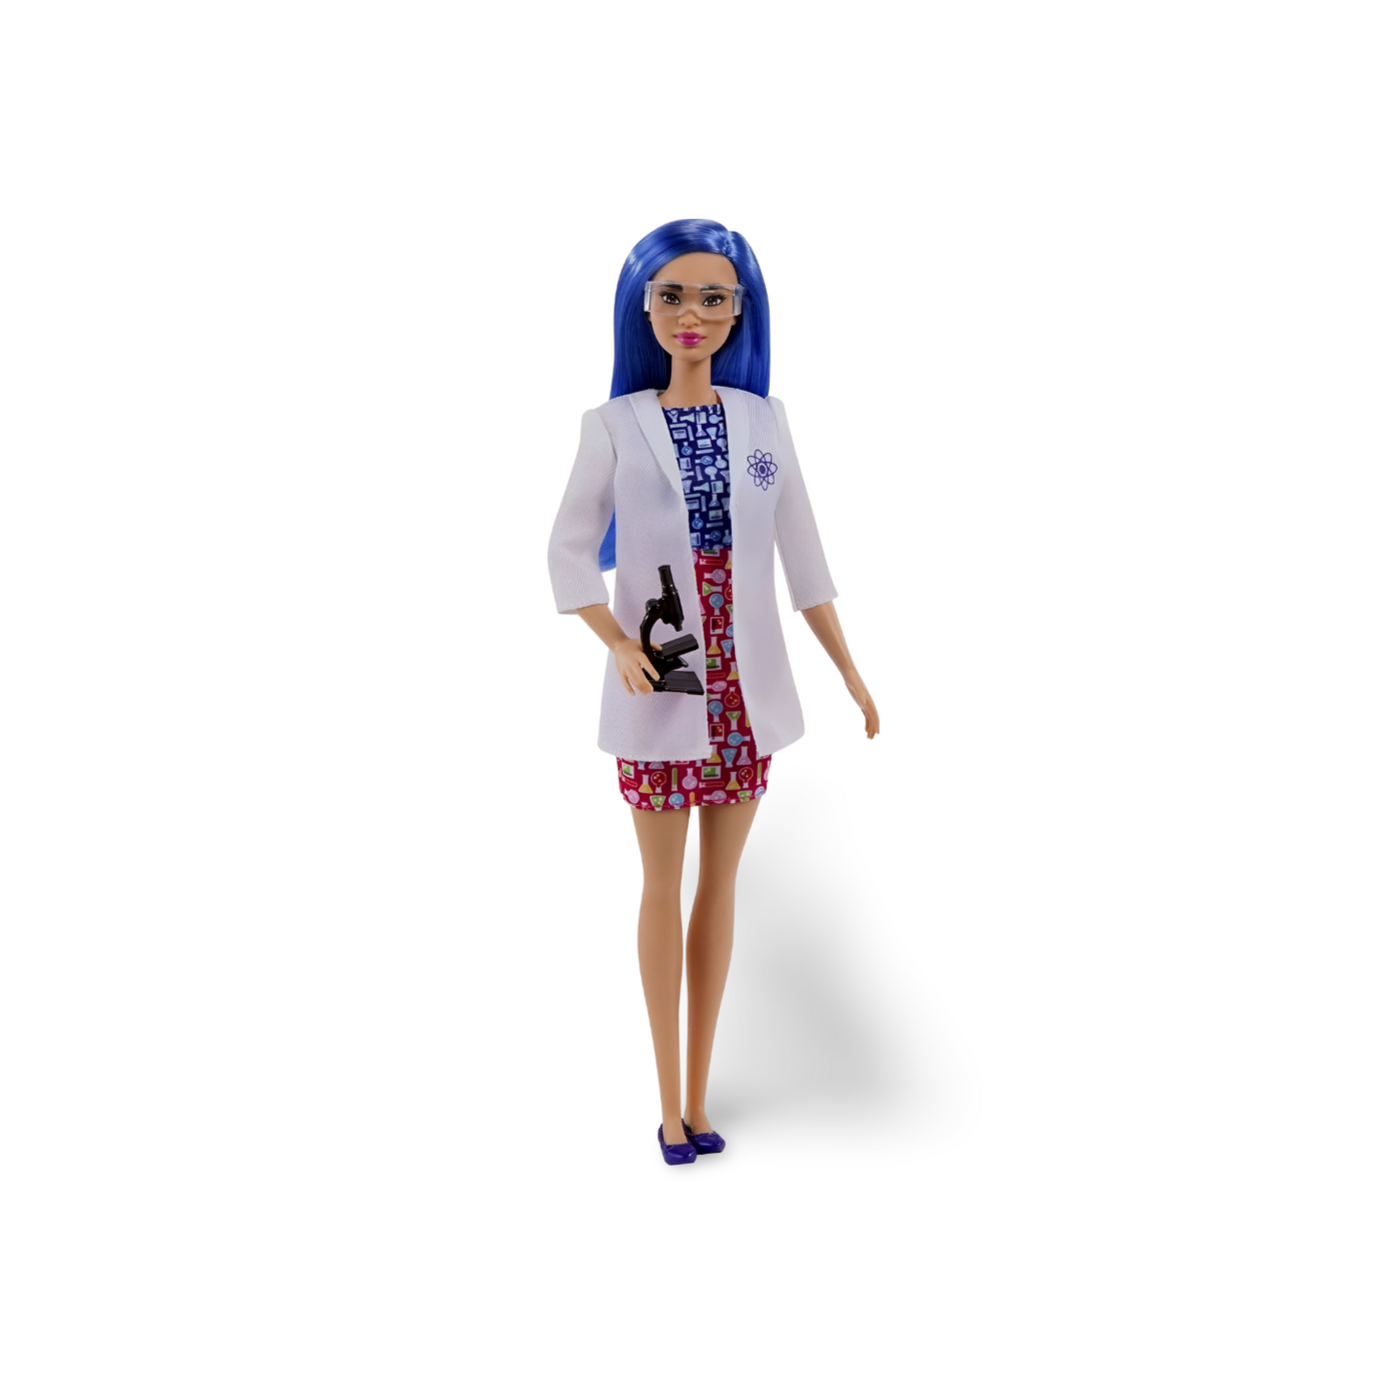 Barbie Scientist Fashion Doll with Blue Hair, Lab Coat & Flats, Microscope Accessory